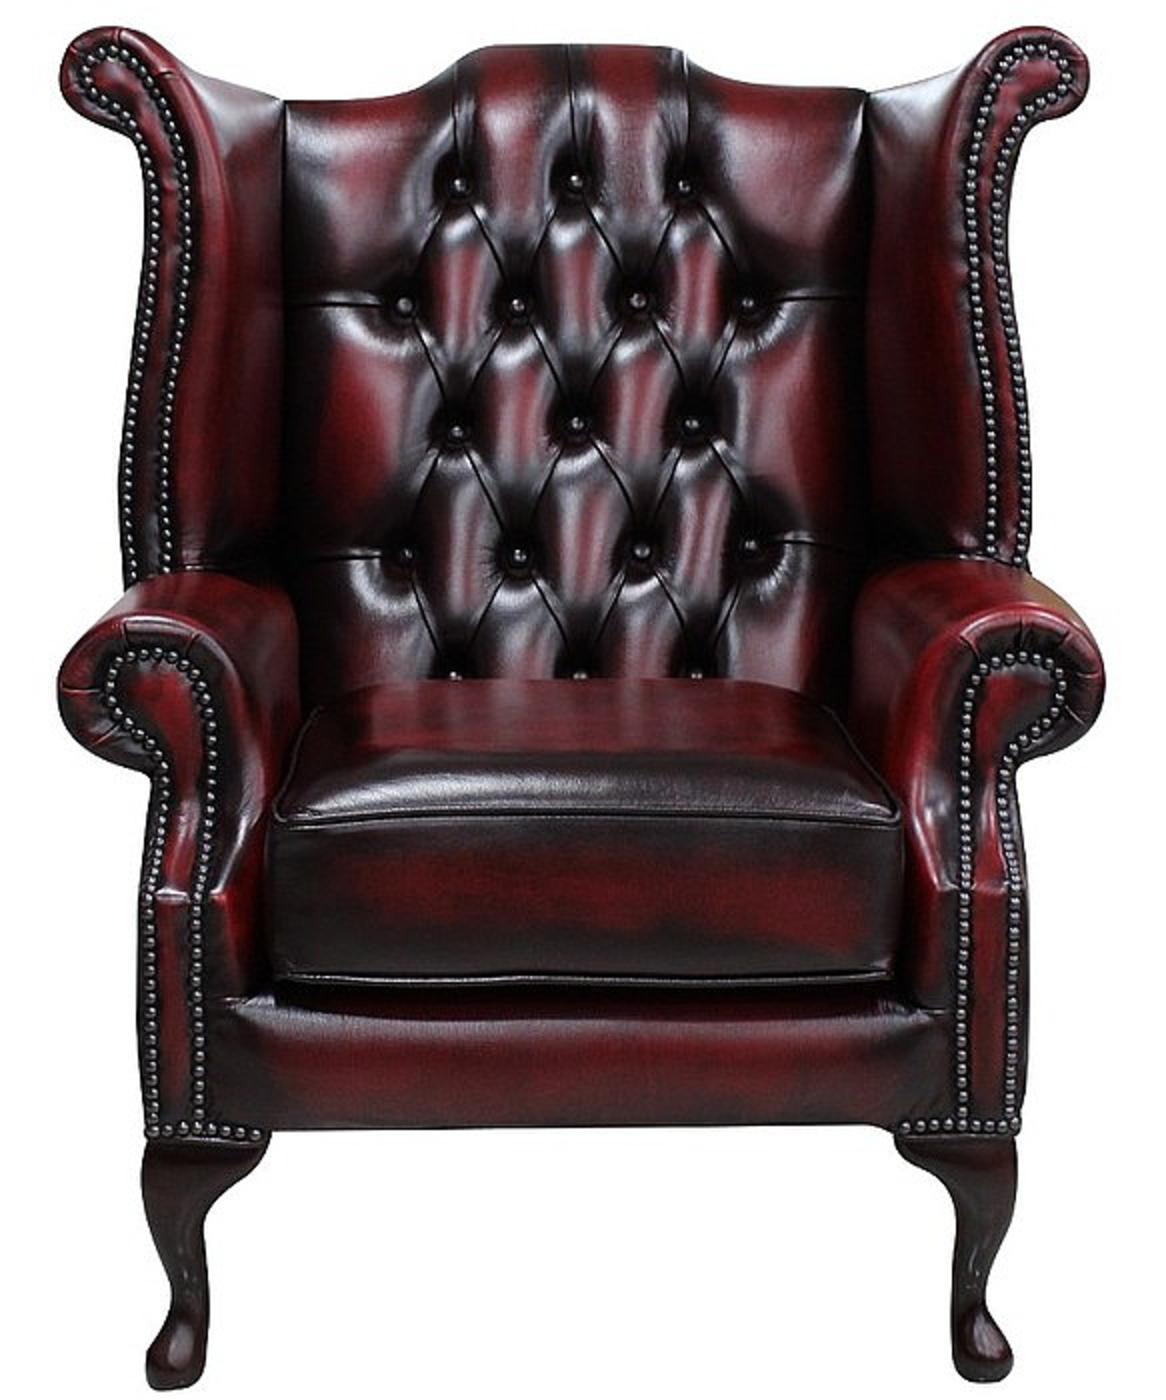 Chesterfield Queen Anne High Back Wing Chair UK Manufactured